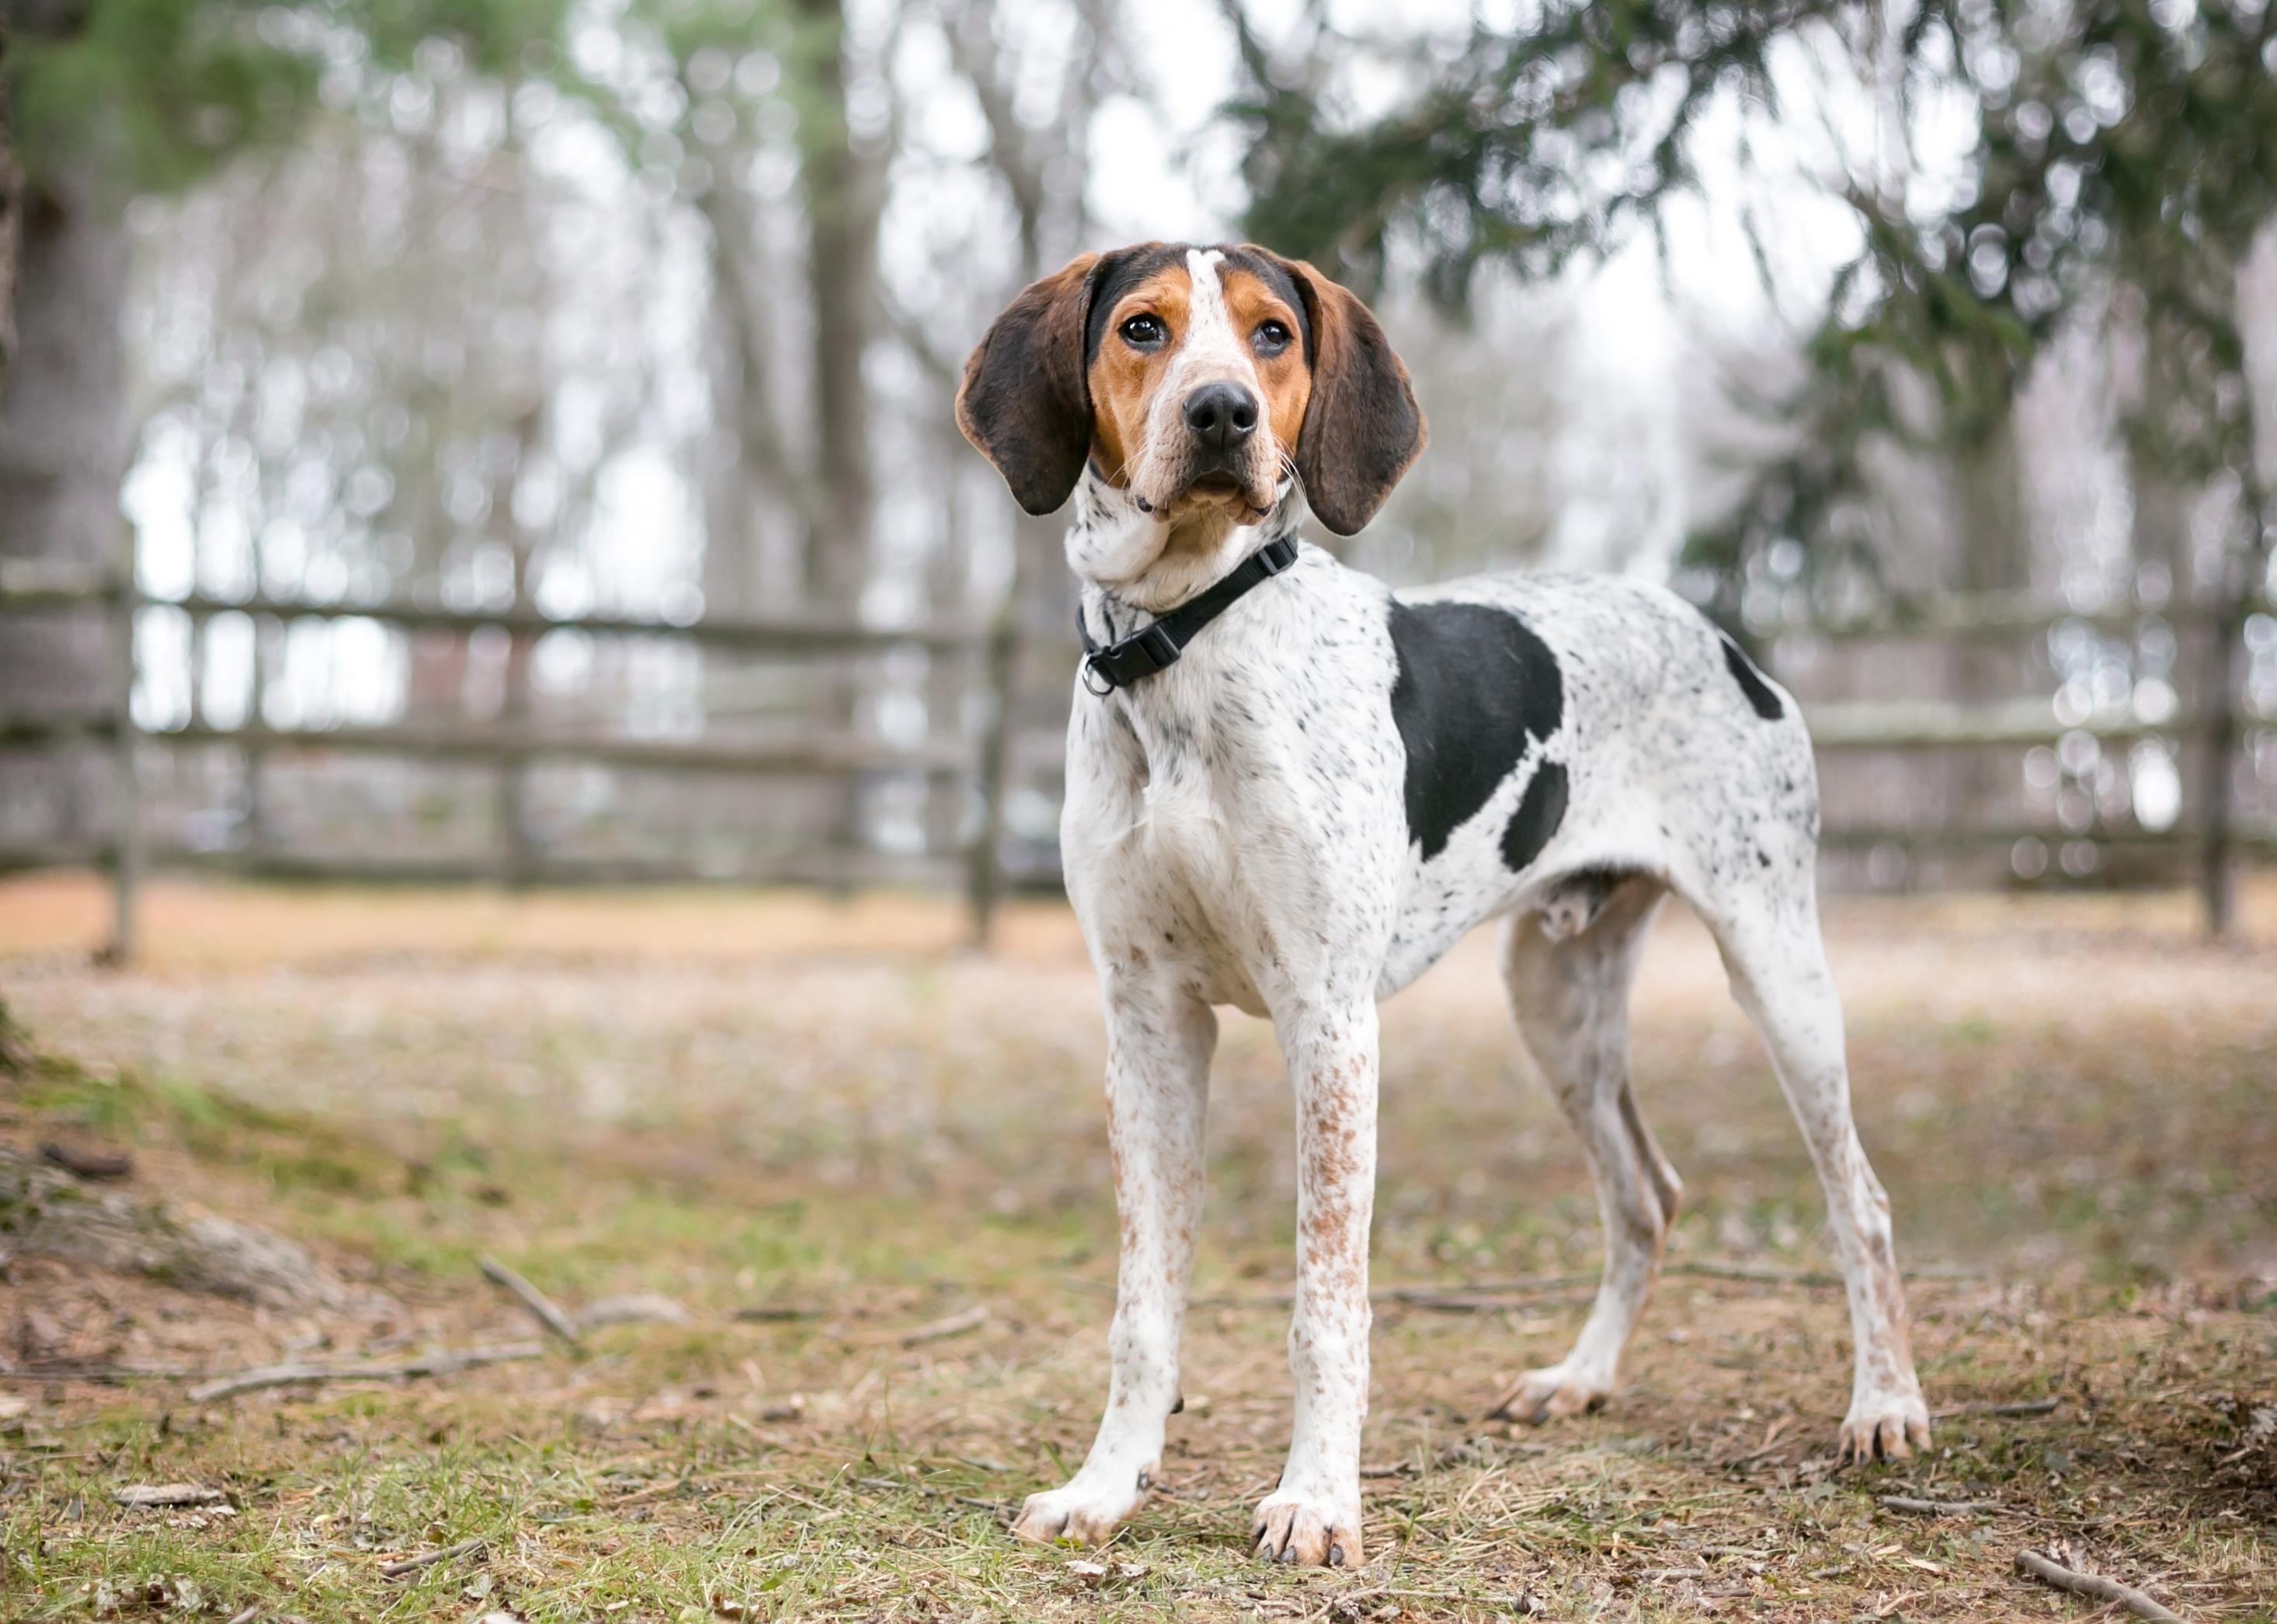 A Treeing Walker Coonhound dog outdoors.